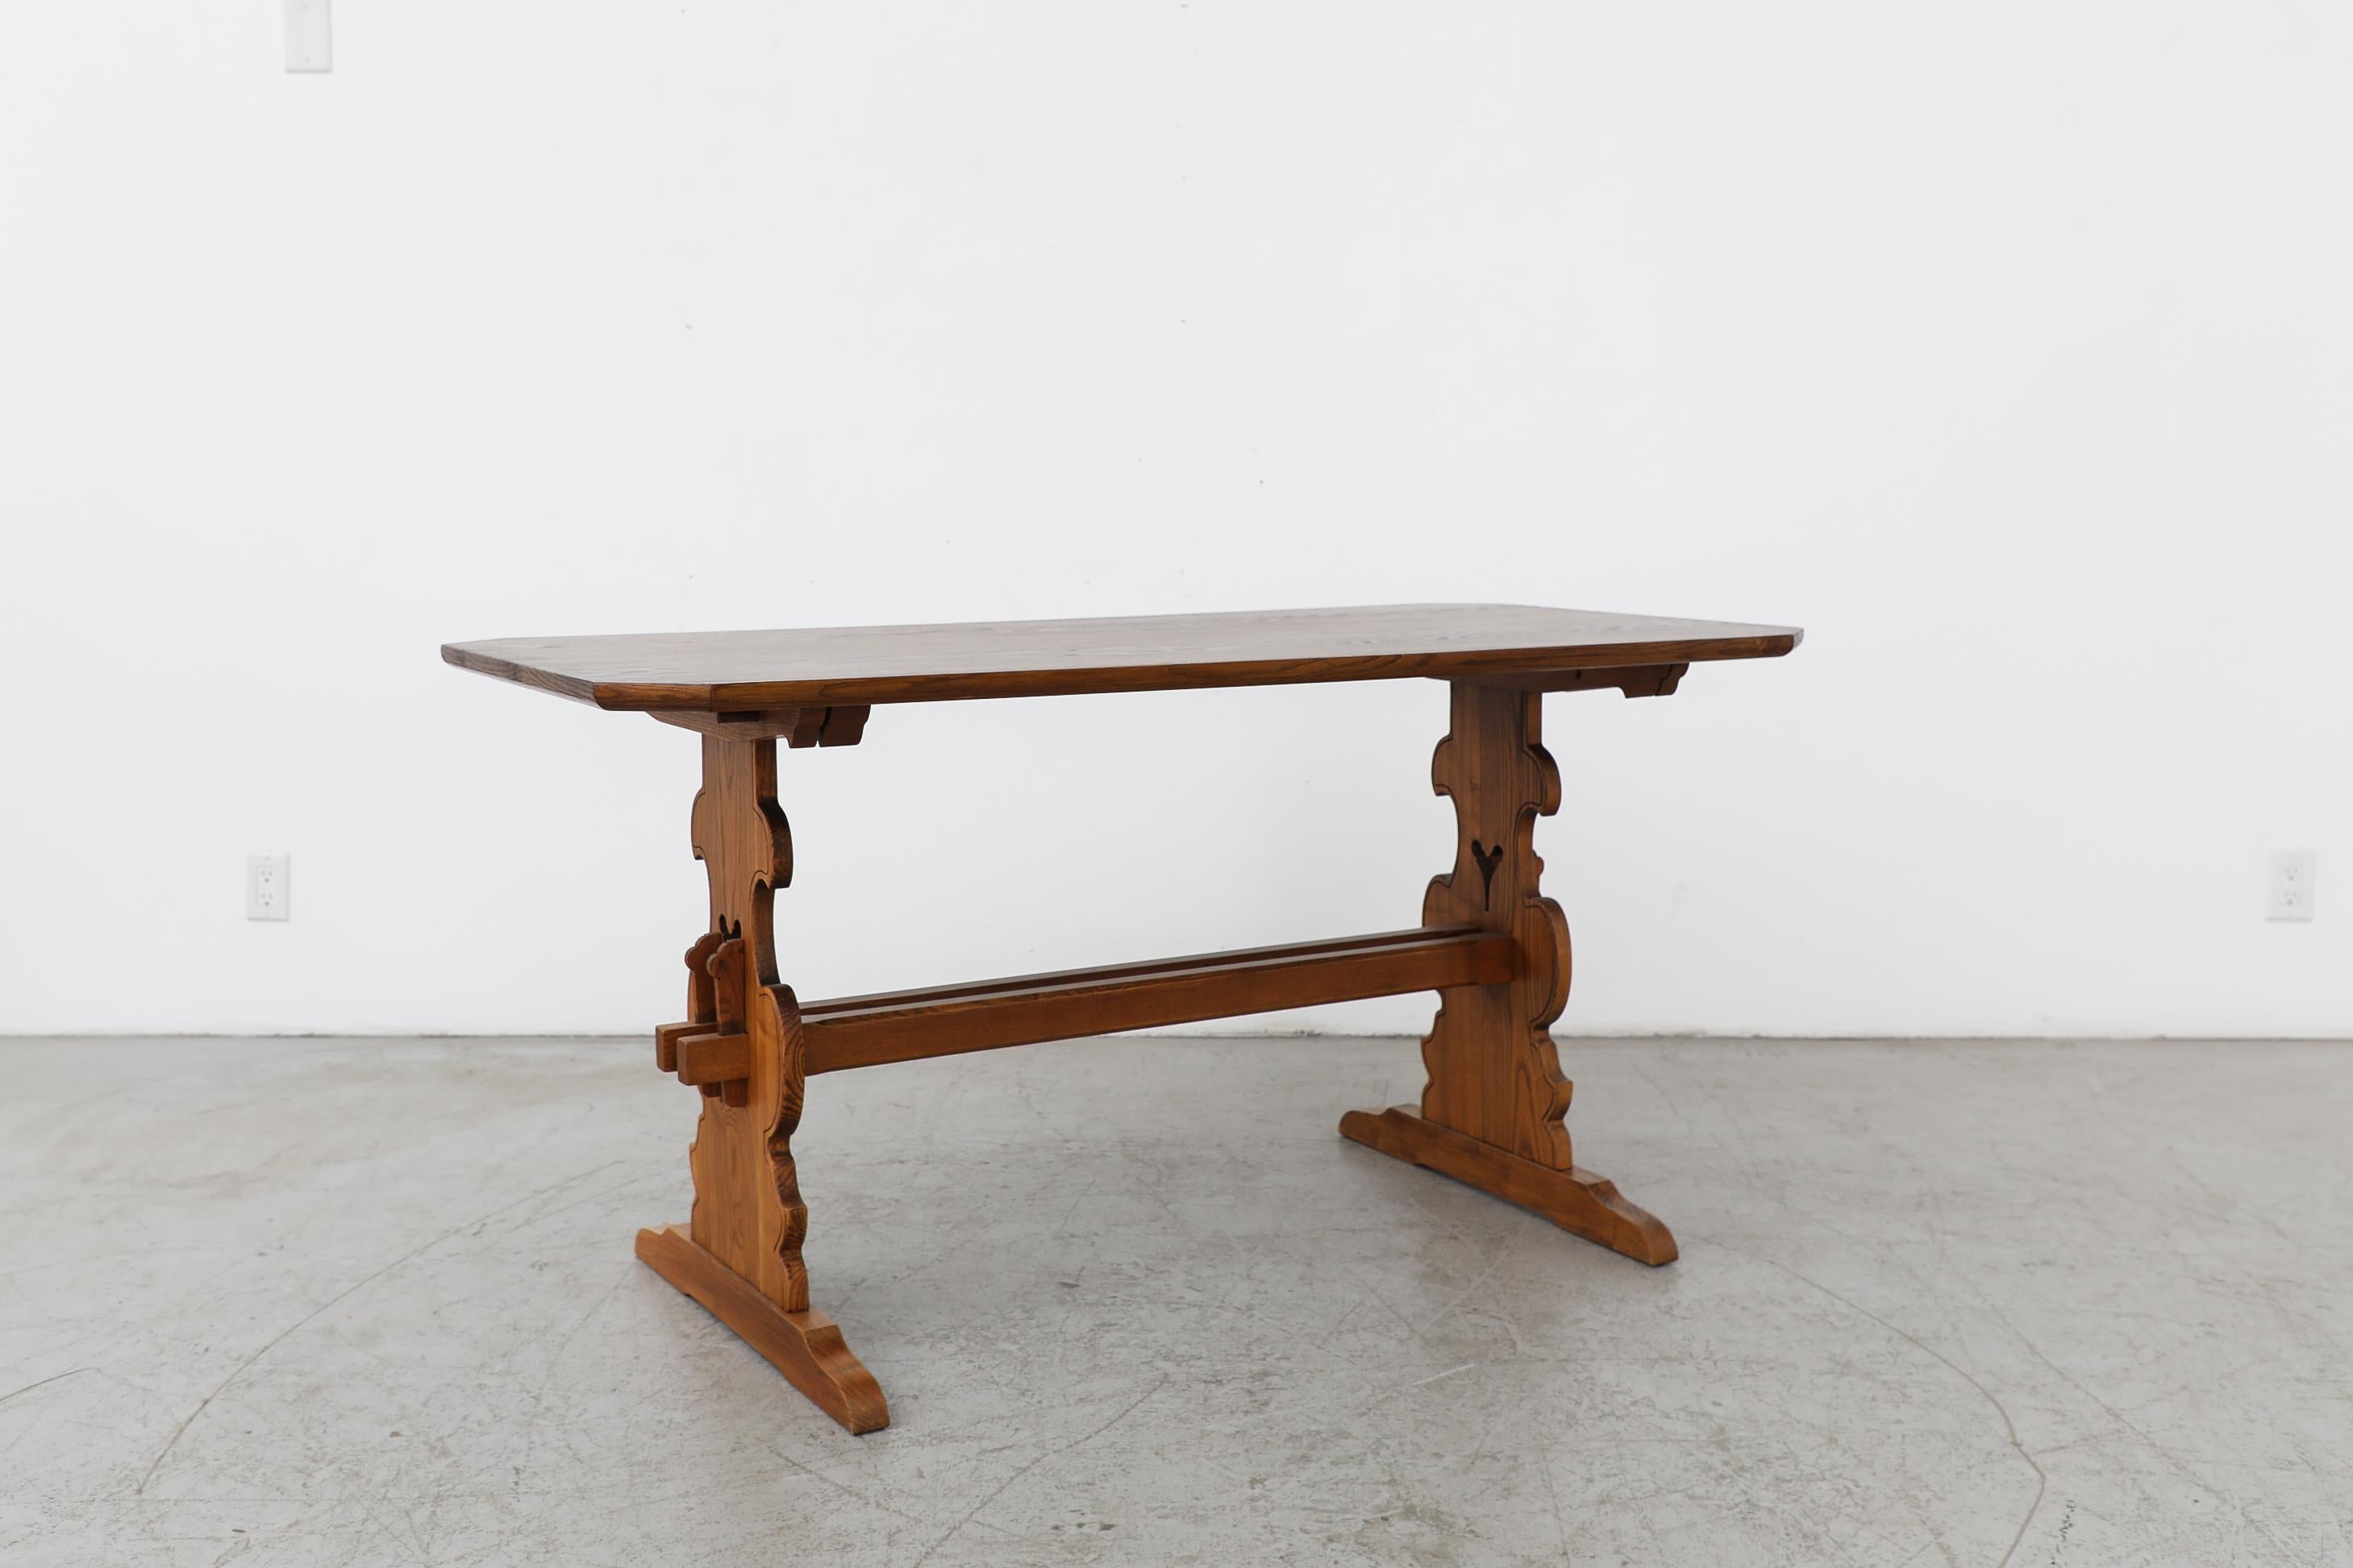 Mid-20th Century Austrian Ornate Brutalist Tyrolean Style Dark Pine Table with Angled Corners